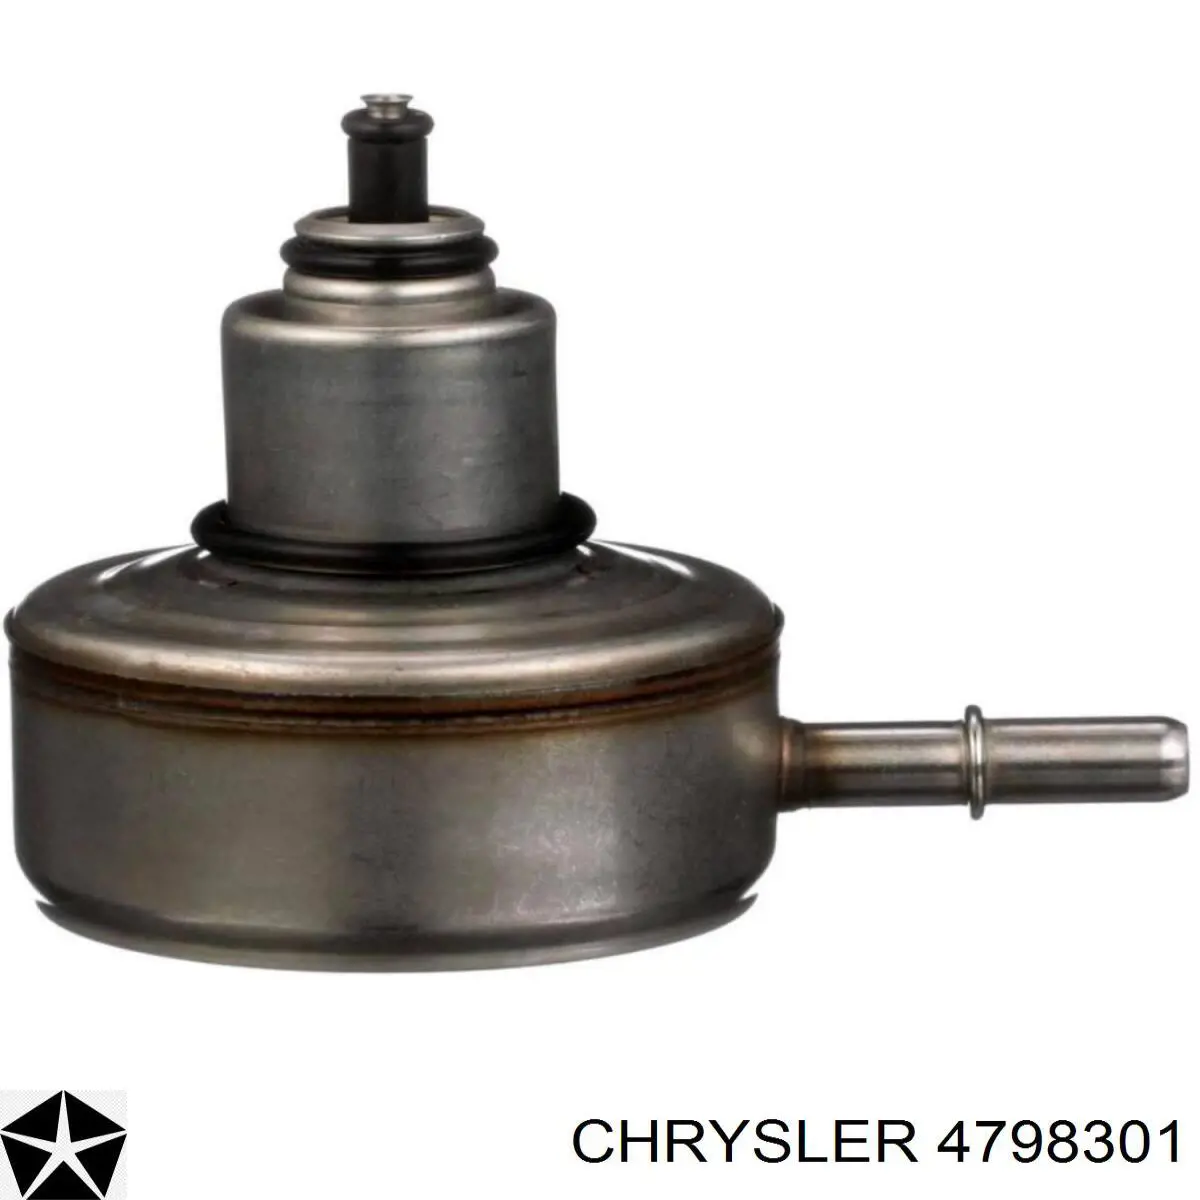 4798301 Chrysler filtro combustible